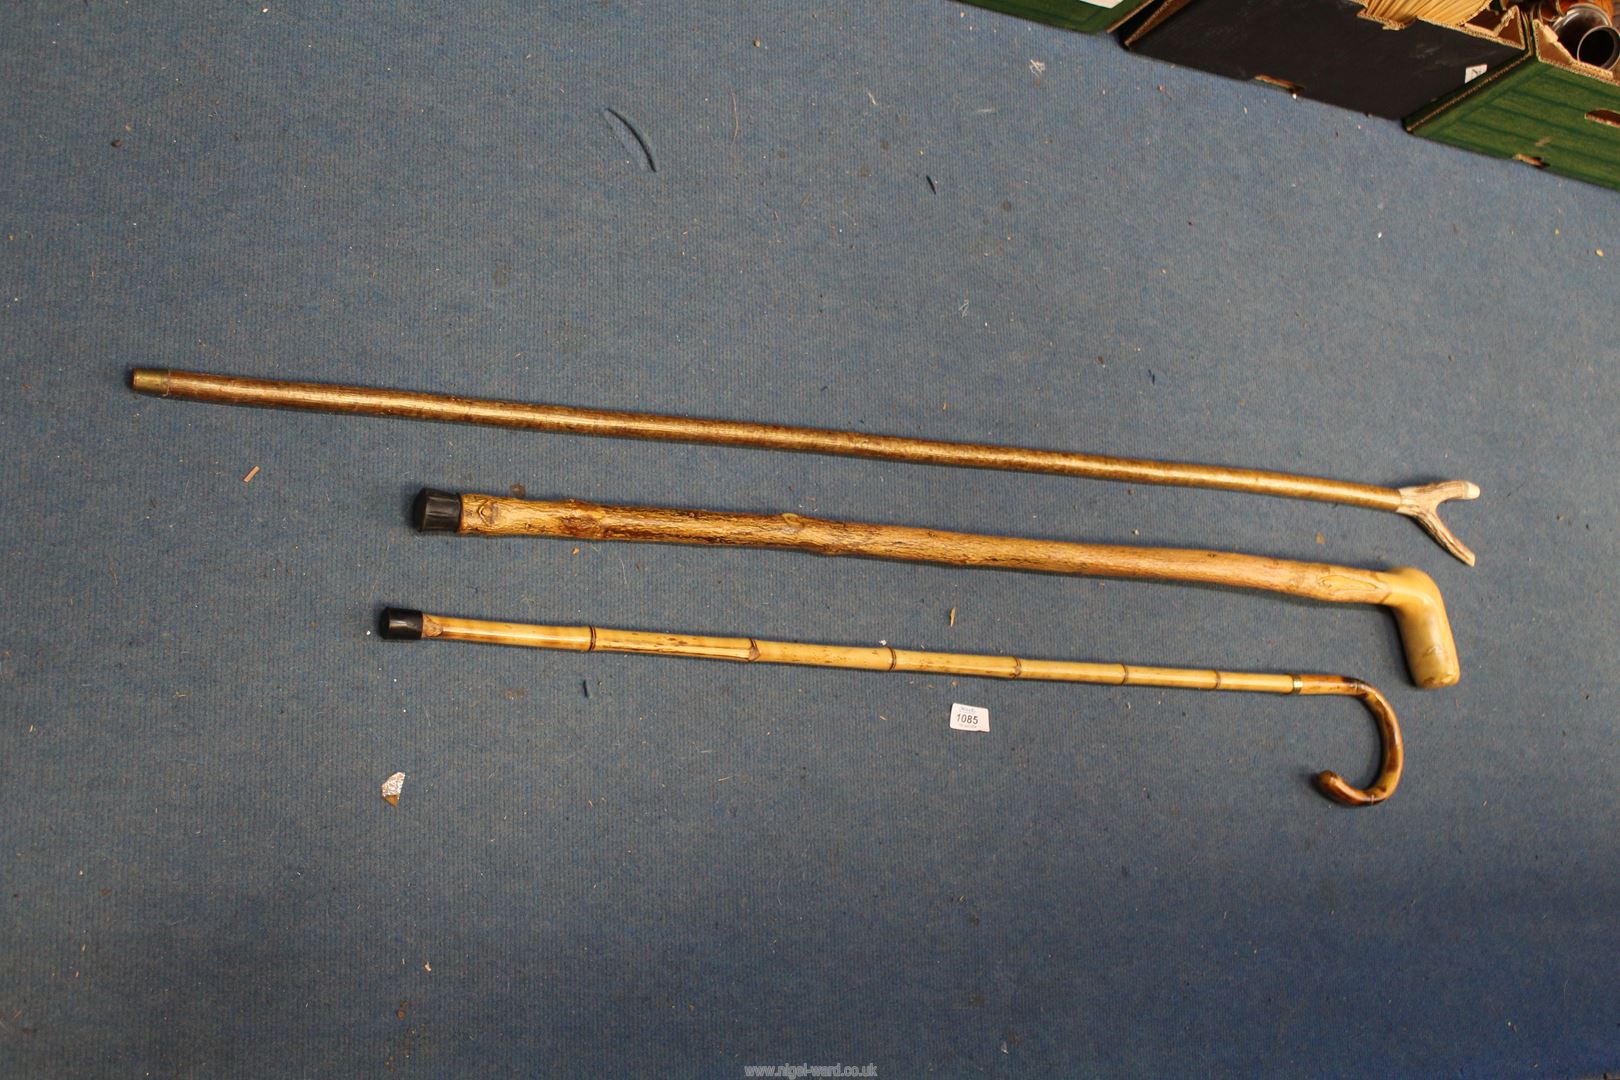 Three walking sticks: one an Antler handled thumb stick with whistle feature.